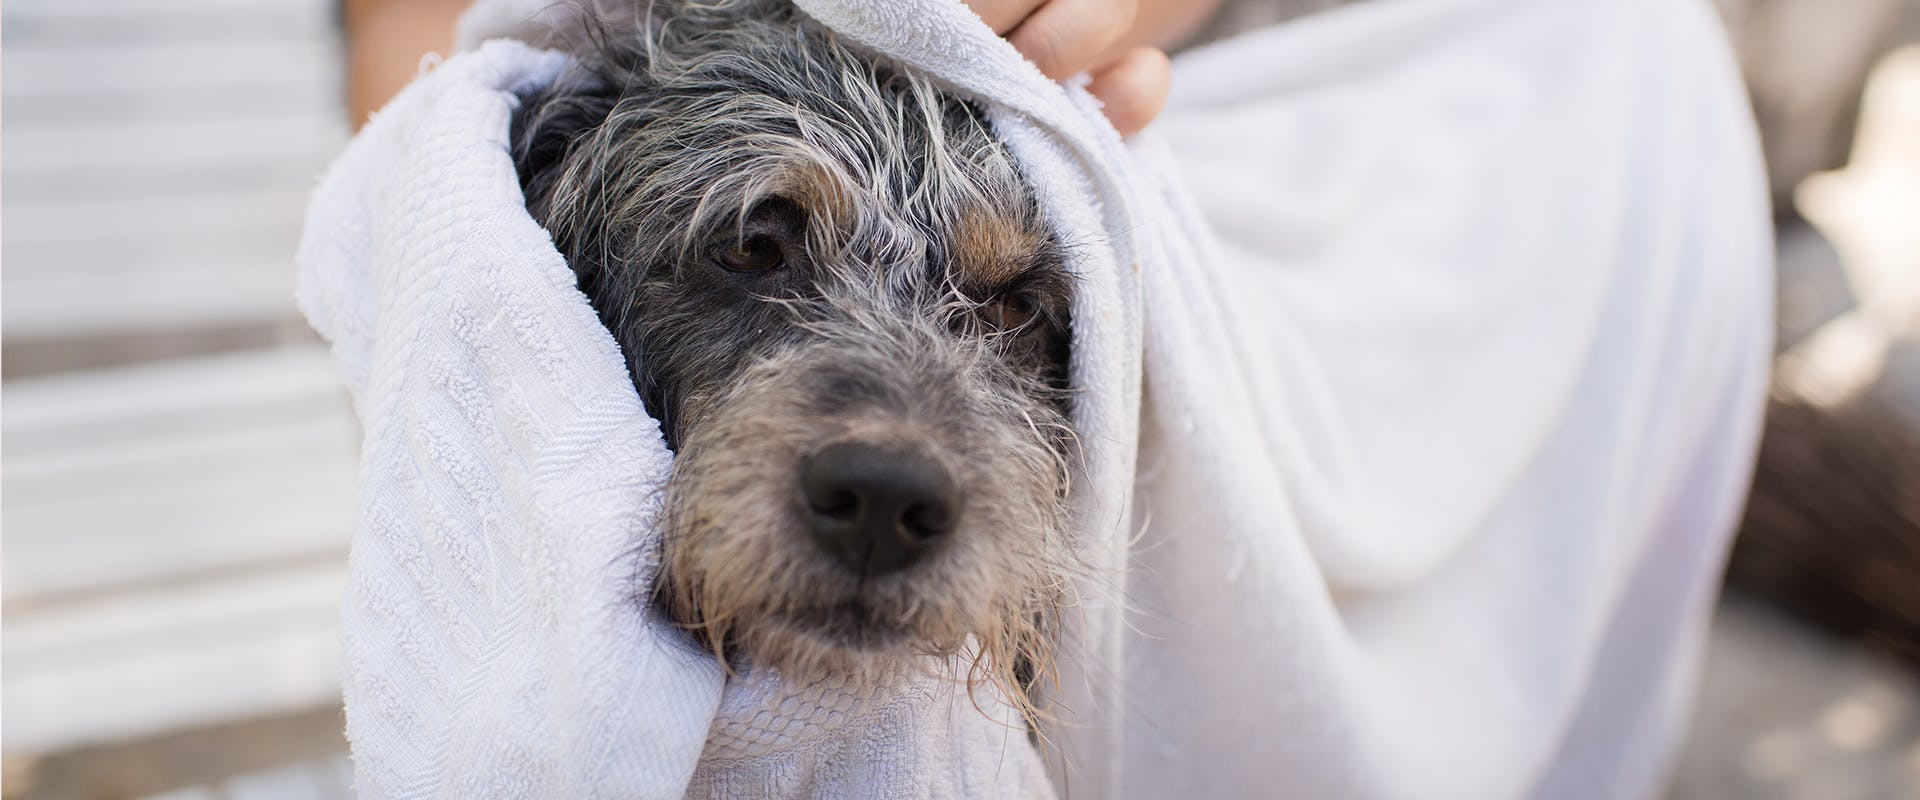 A dog just after a bath, a person drying them with a white fluffy towel